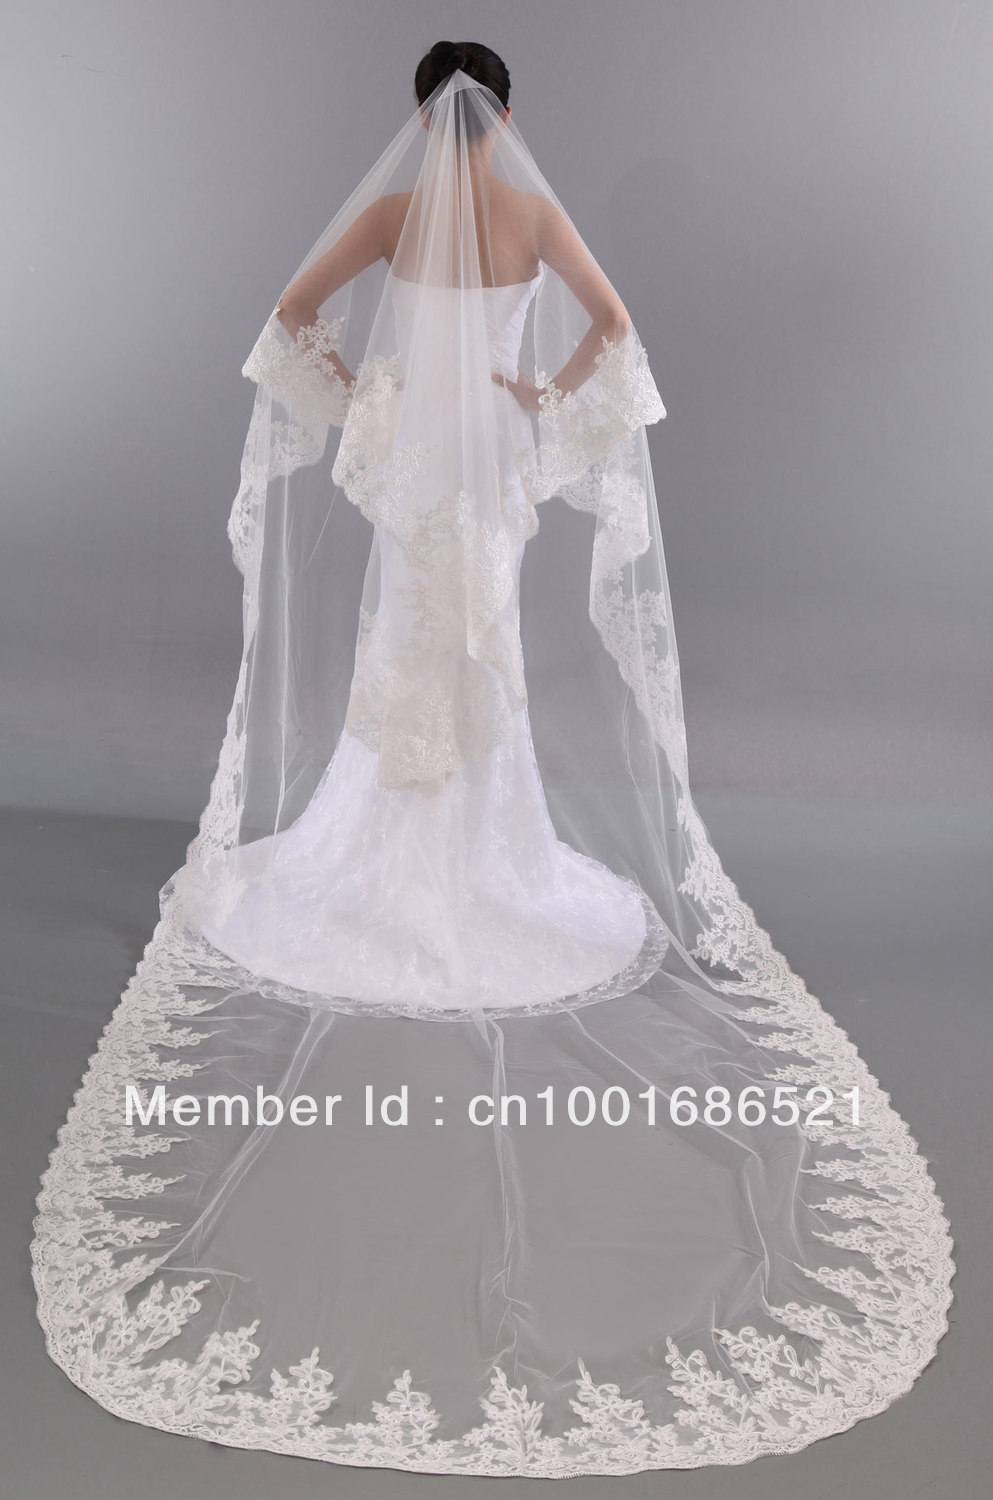 free shipping & wholesale 2013 new styel brige veil with beige color, single 5 meters long,  fashion wedding dress accessories